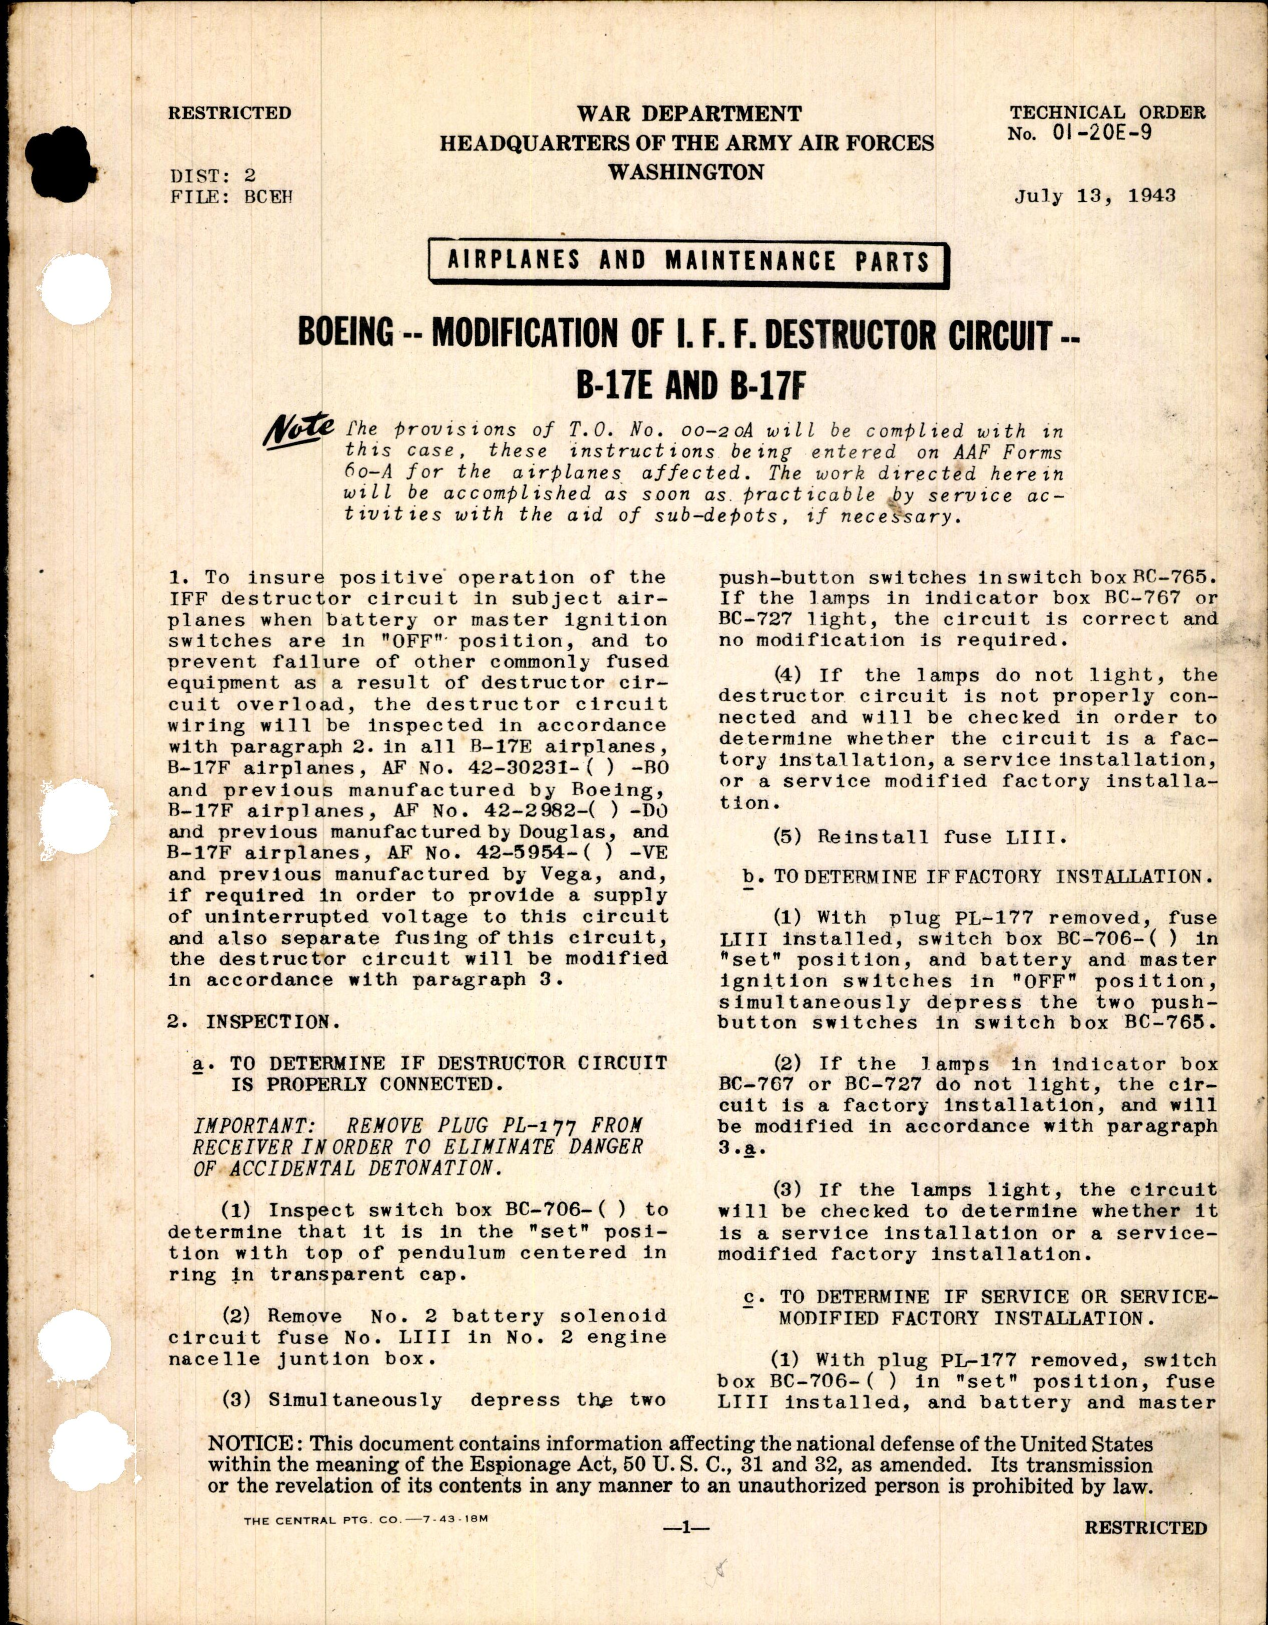 Sample page 1 from AirCorps Library document: Modification of I.F.F. Destructor Circuit for B-17E and F